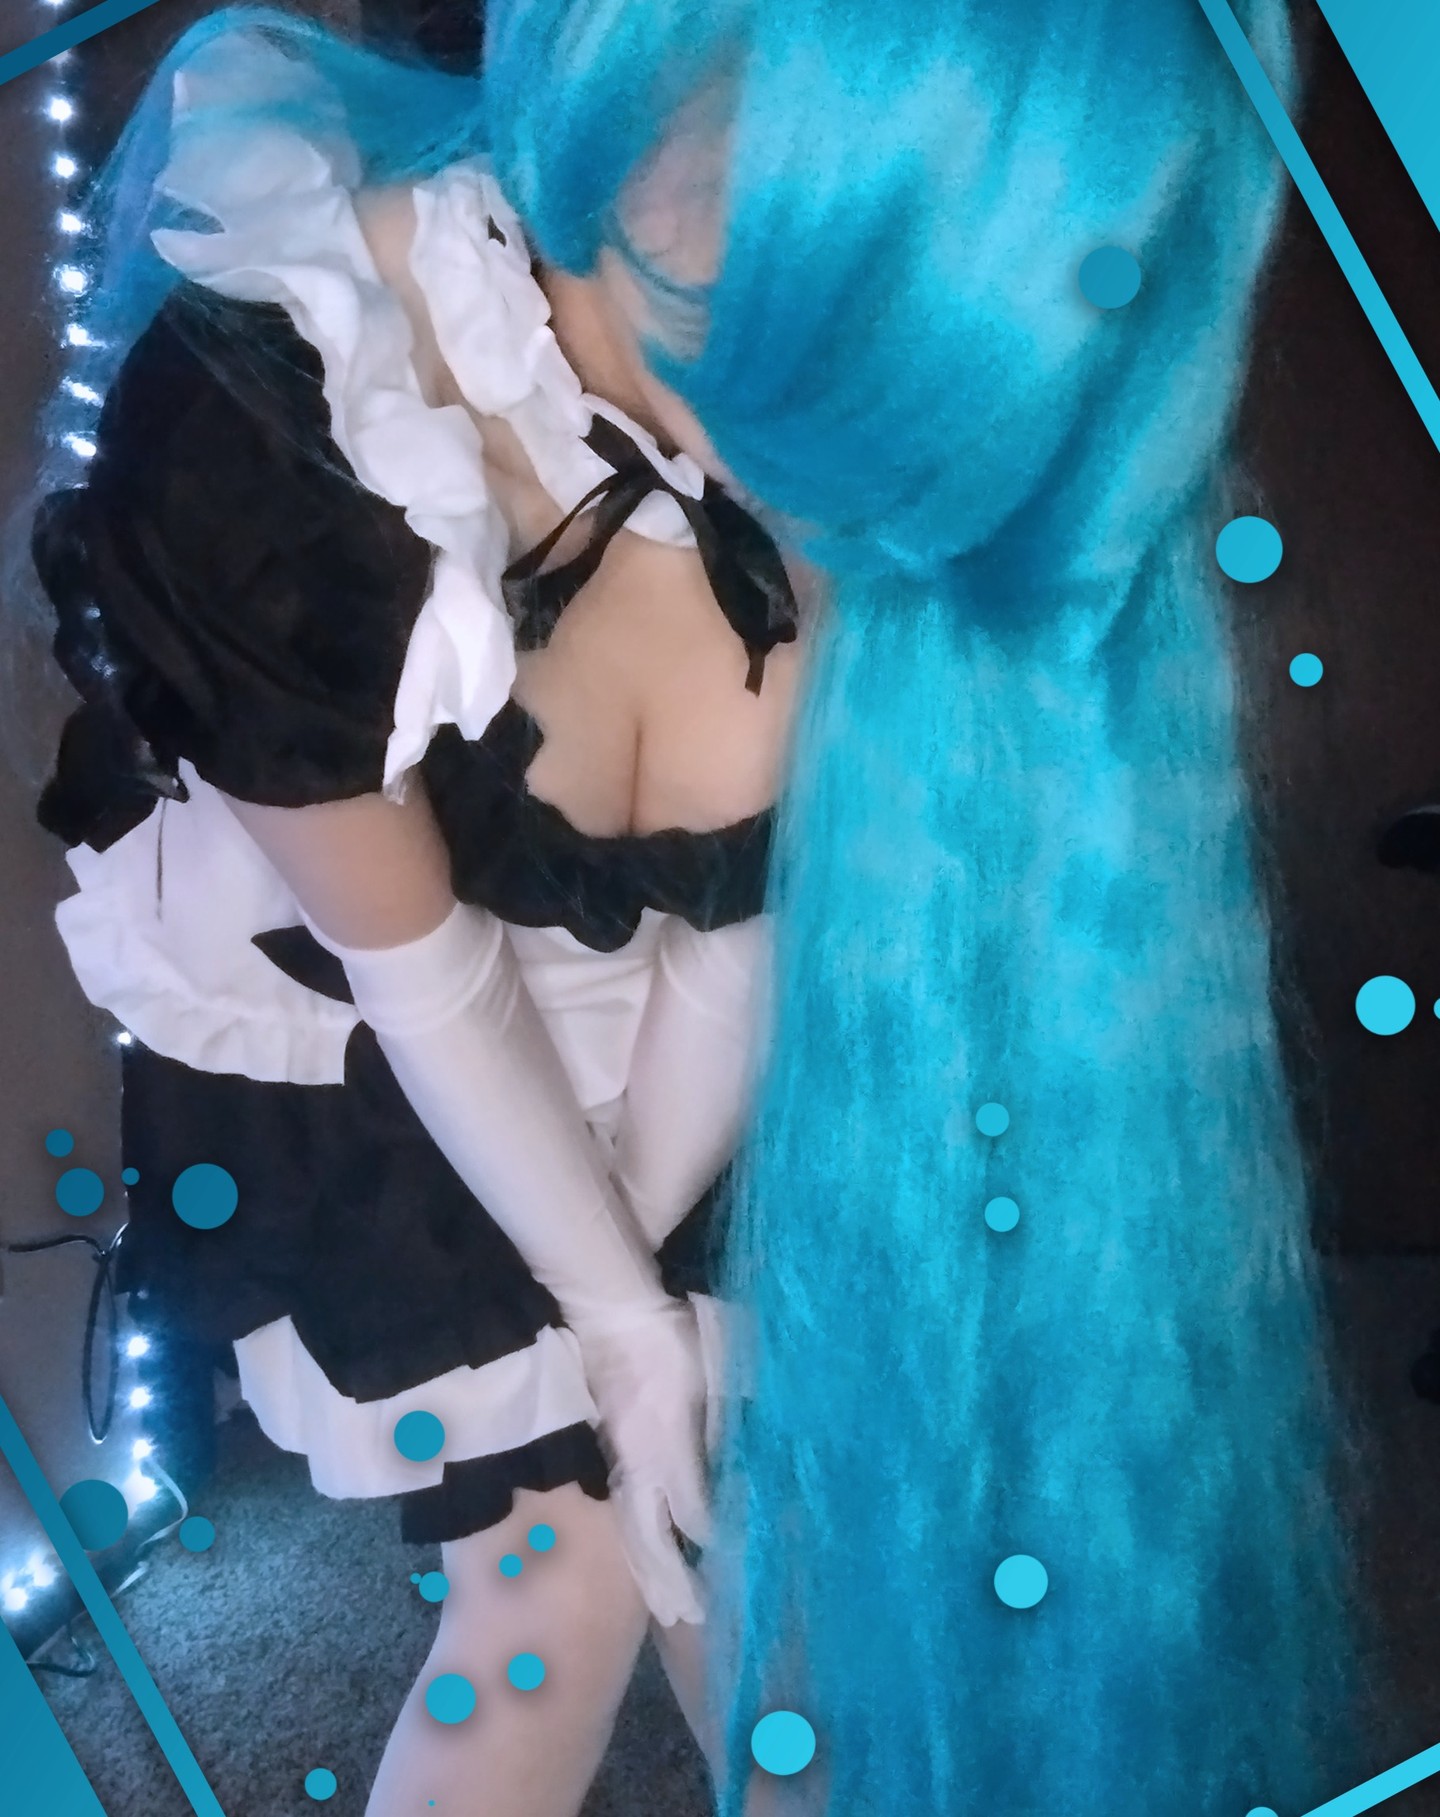 I hope you are having a good day! <3
Did you know a group of butterflies is called a kaleidoscope? 

Thank you Aa for the outfit!
.
.
.
.
#maidcosplay #egirlclothes #blackandwhiteclothing #animemaid #bluehairanimegirl #ofgirls